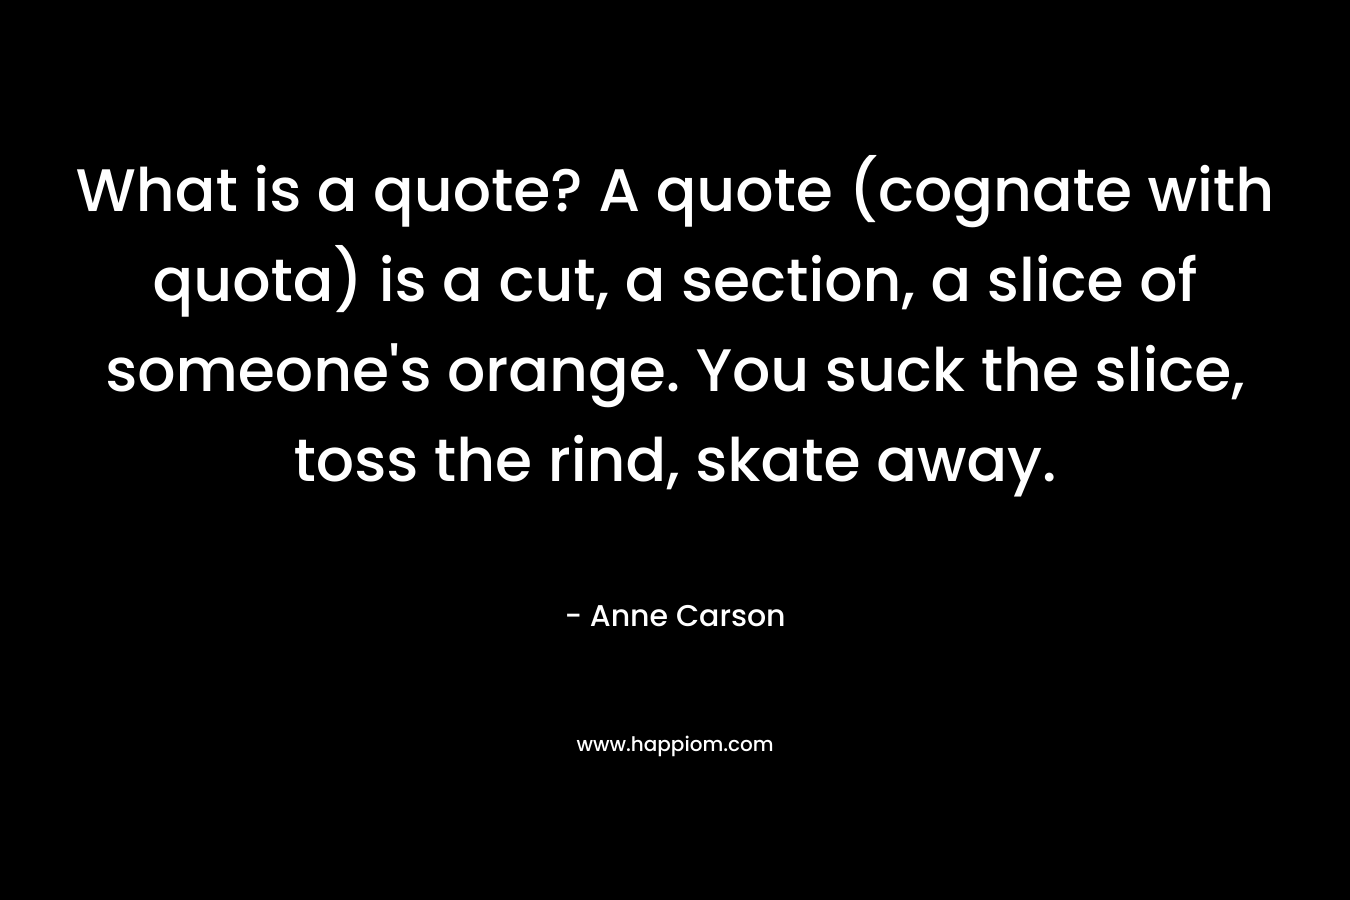 What is a quote? A quote (cognate with quota) is a cut, a section, a slice of someone's orange. You suck the slice, toss the rind, skate away.